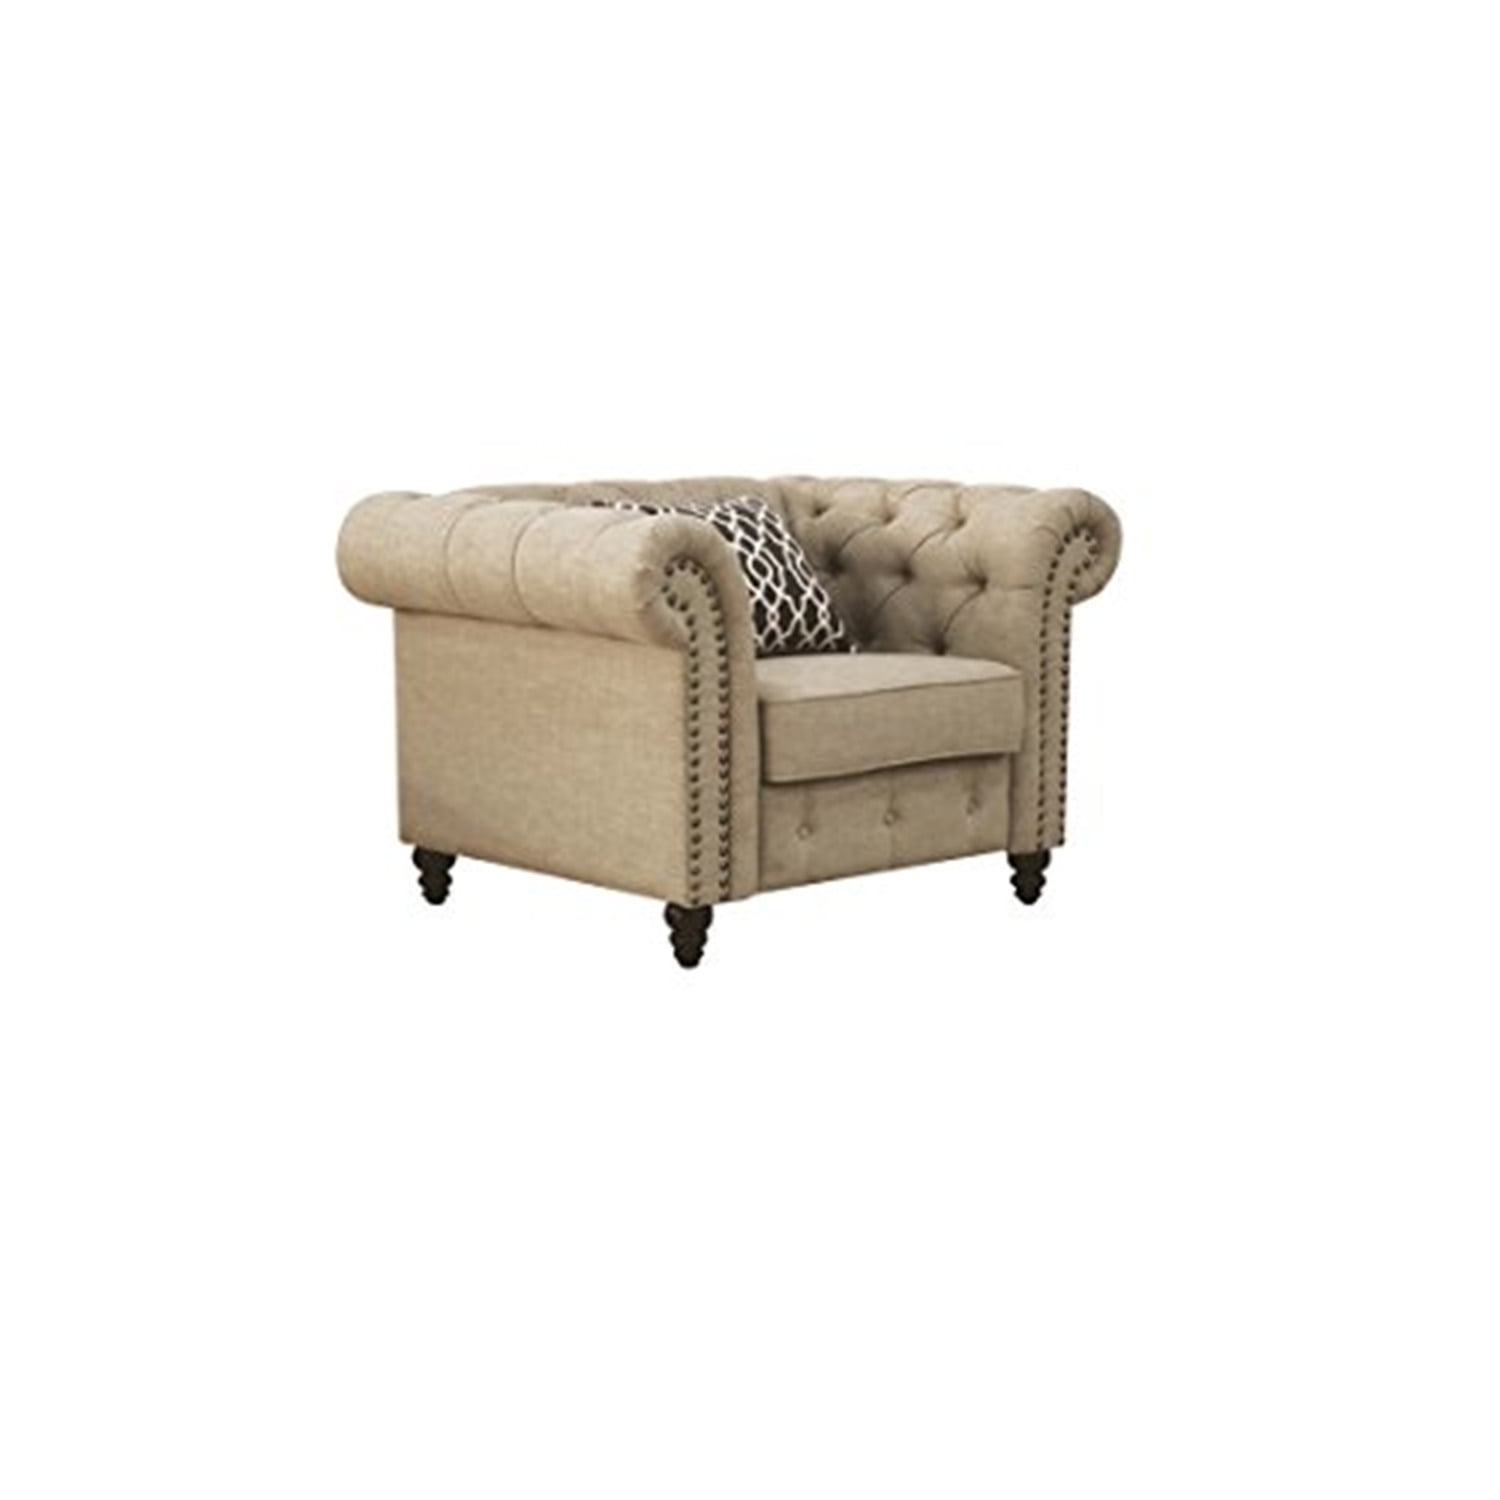 Picture of ACME 52422 Aurelia Chair with Pillow, Beige Linen